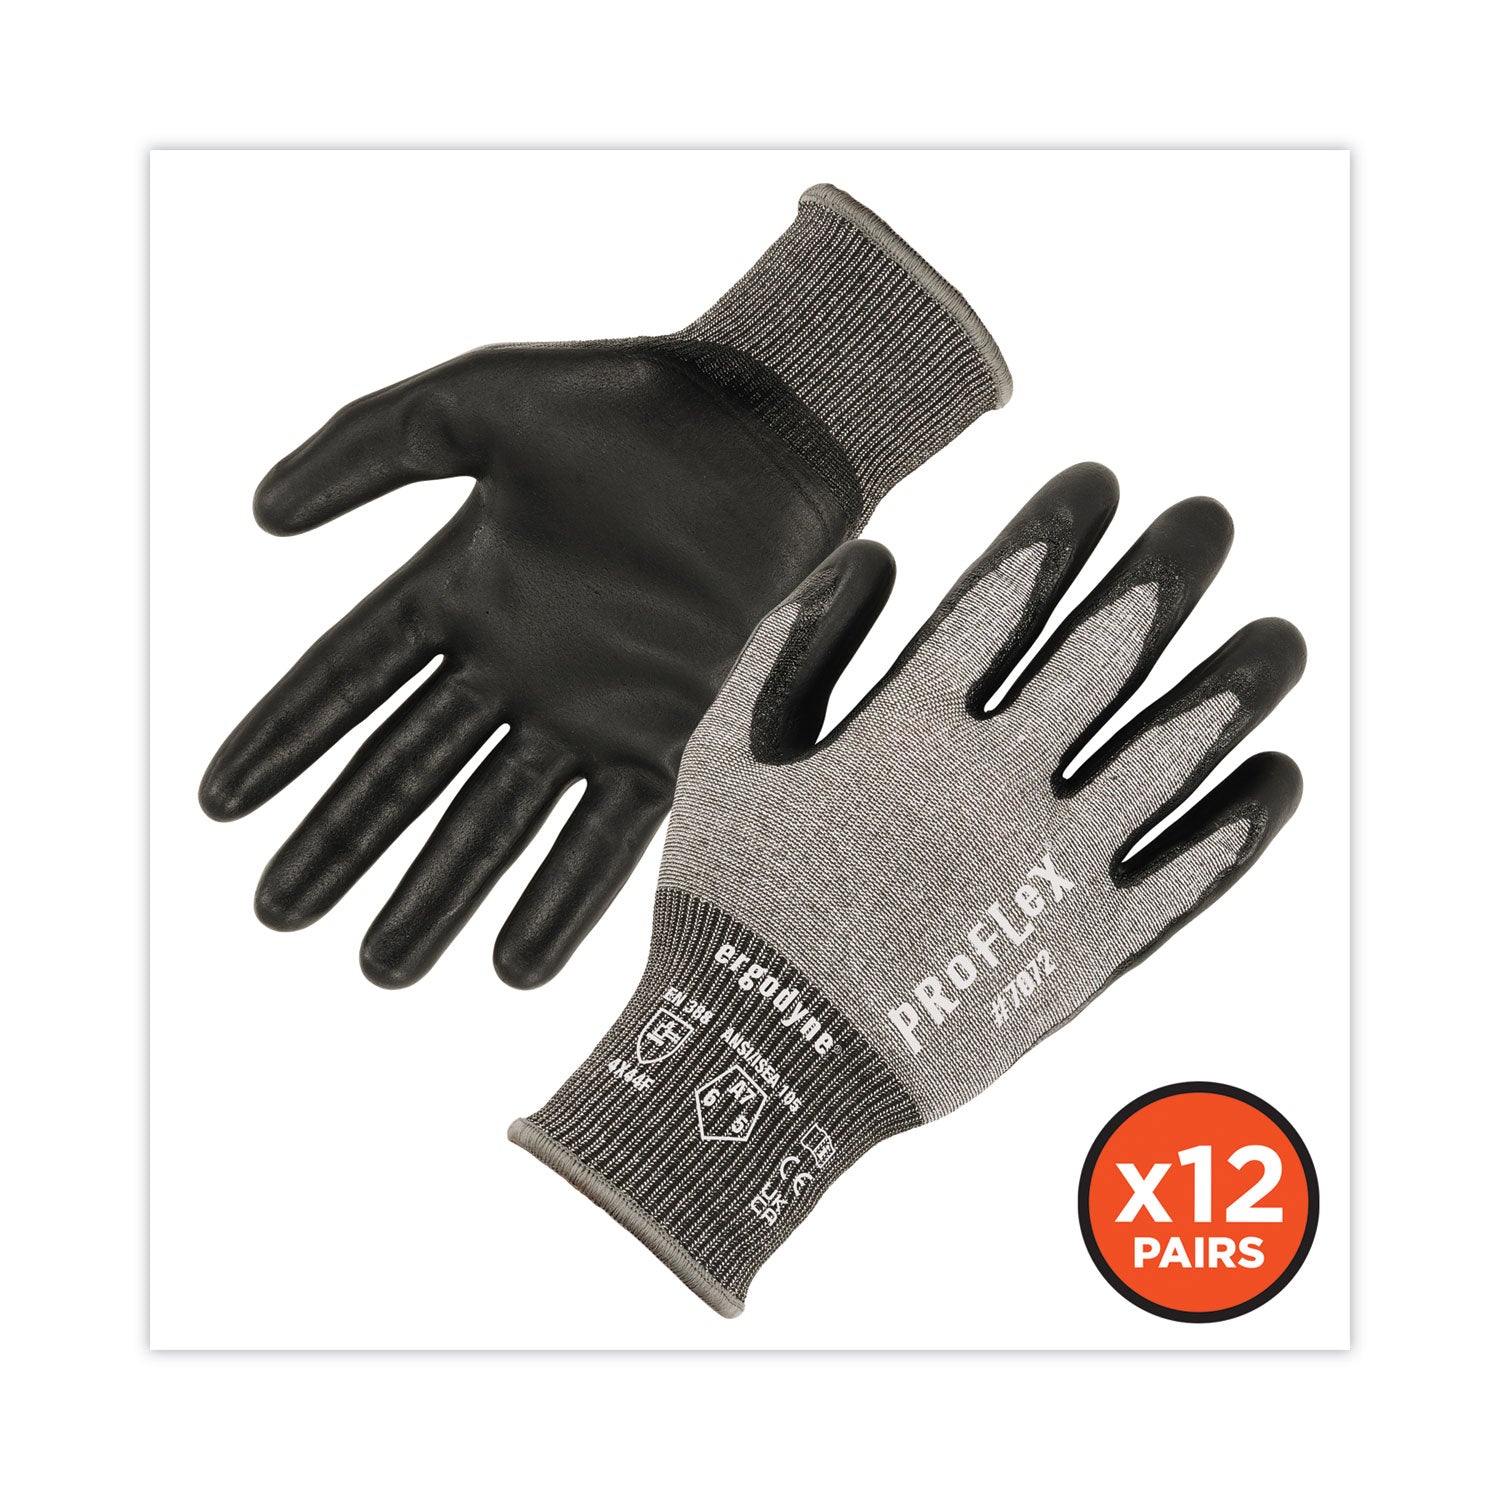 proflex-7072-ansi-a7-nitrile-coated-cr-gloves-gray-large-12-pairs-pack-ships-in-1-3-business-days_ego10304 - 4